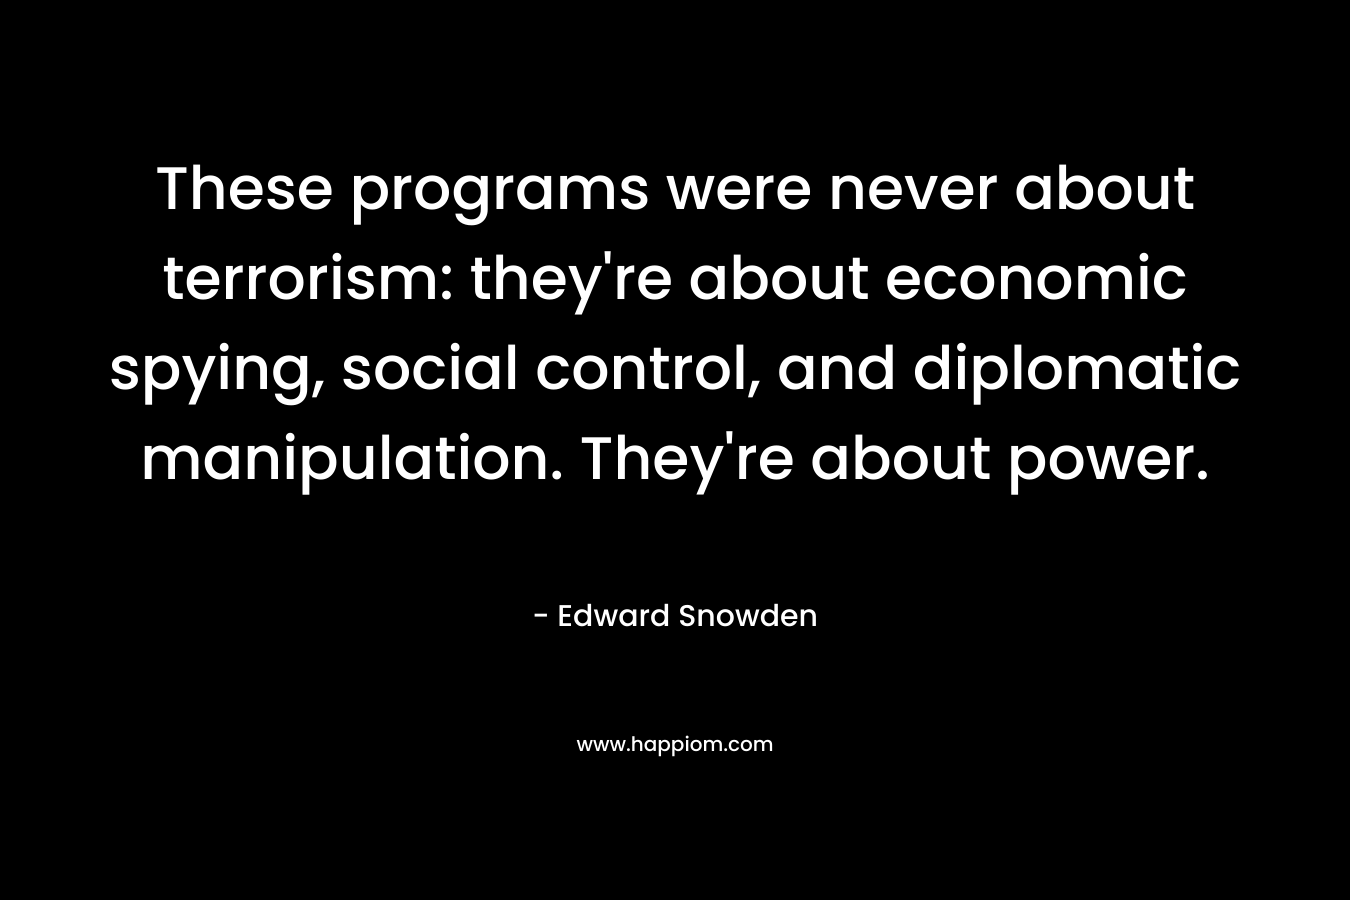 These programs were never about terrorism: they're about economic spying, social control, and diplomatic manipulation. They're about power.